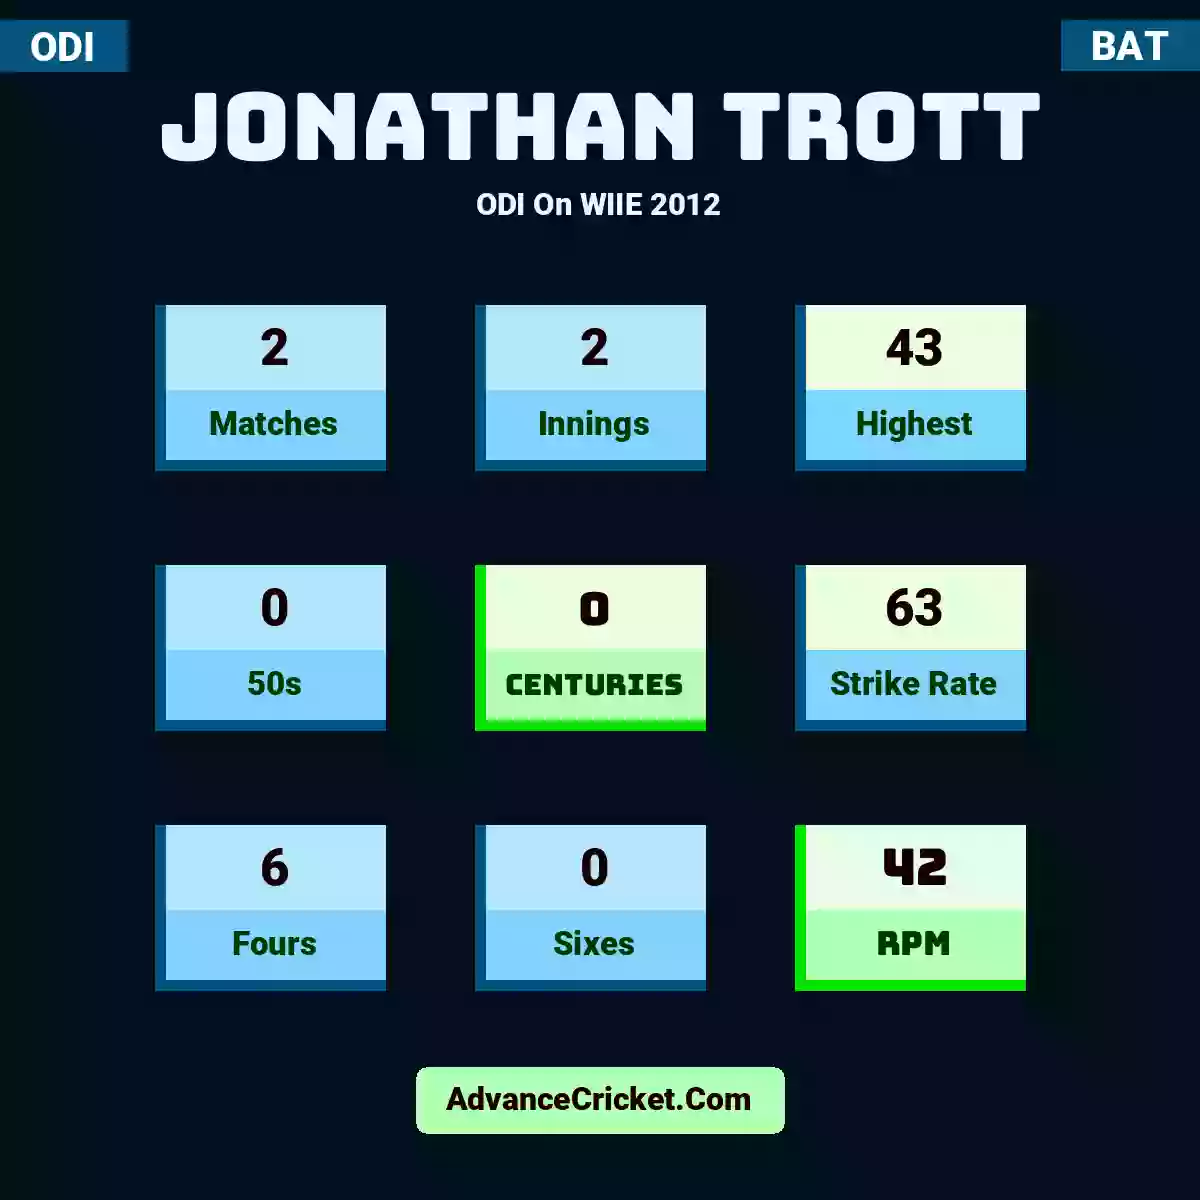 Jonathan Trott ODI  On WIIE 2012, Jonathan Trott played 2 matches, scored 43 runs as highest, 0 half-centuries, and 0 centuries, with a strike rate of 63. J.Trott hit 6 fours and 0 sixes, with an RPM of 42.